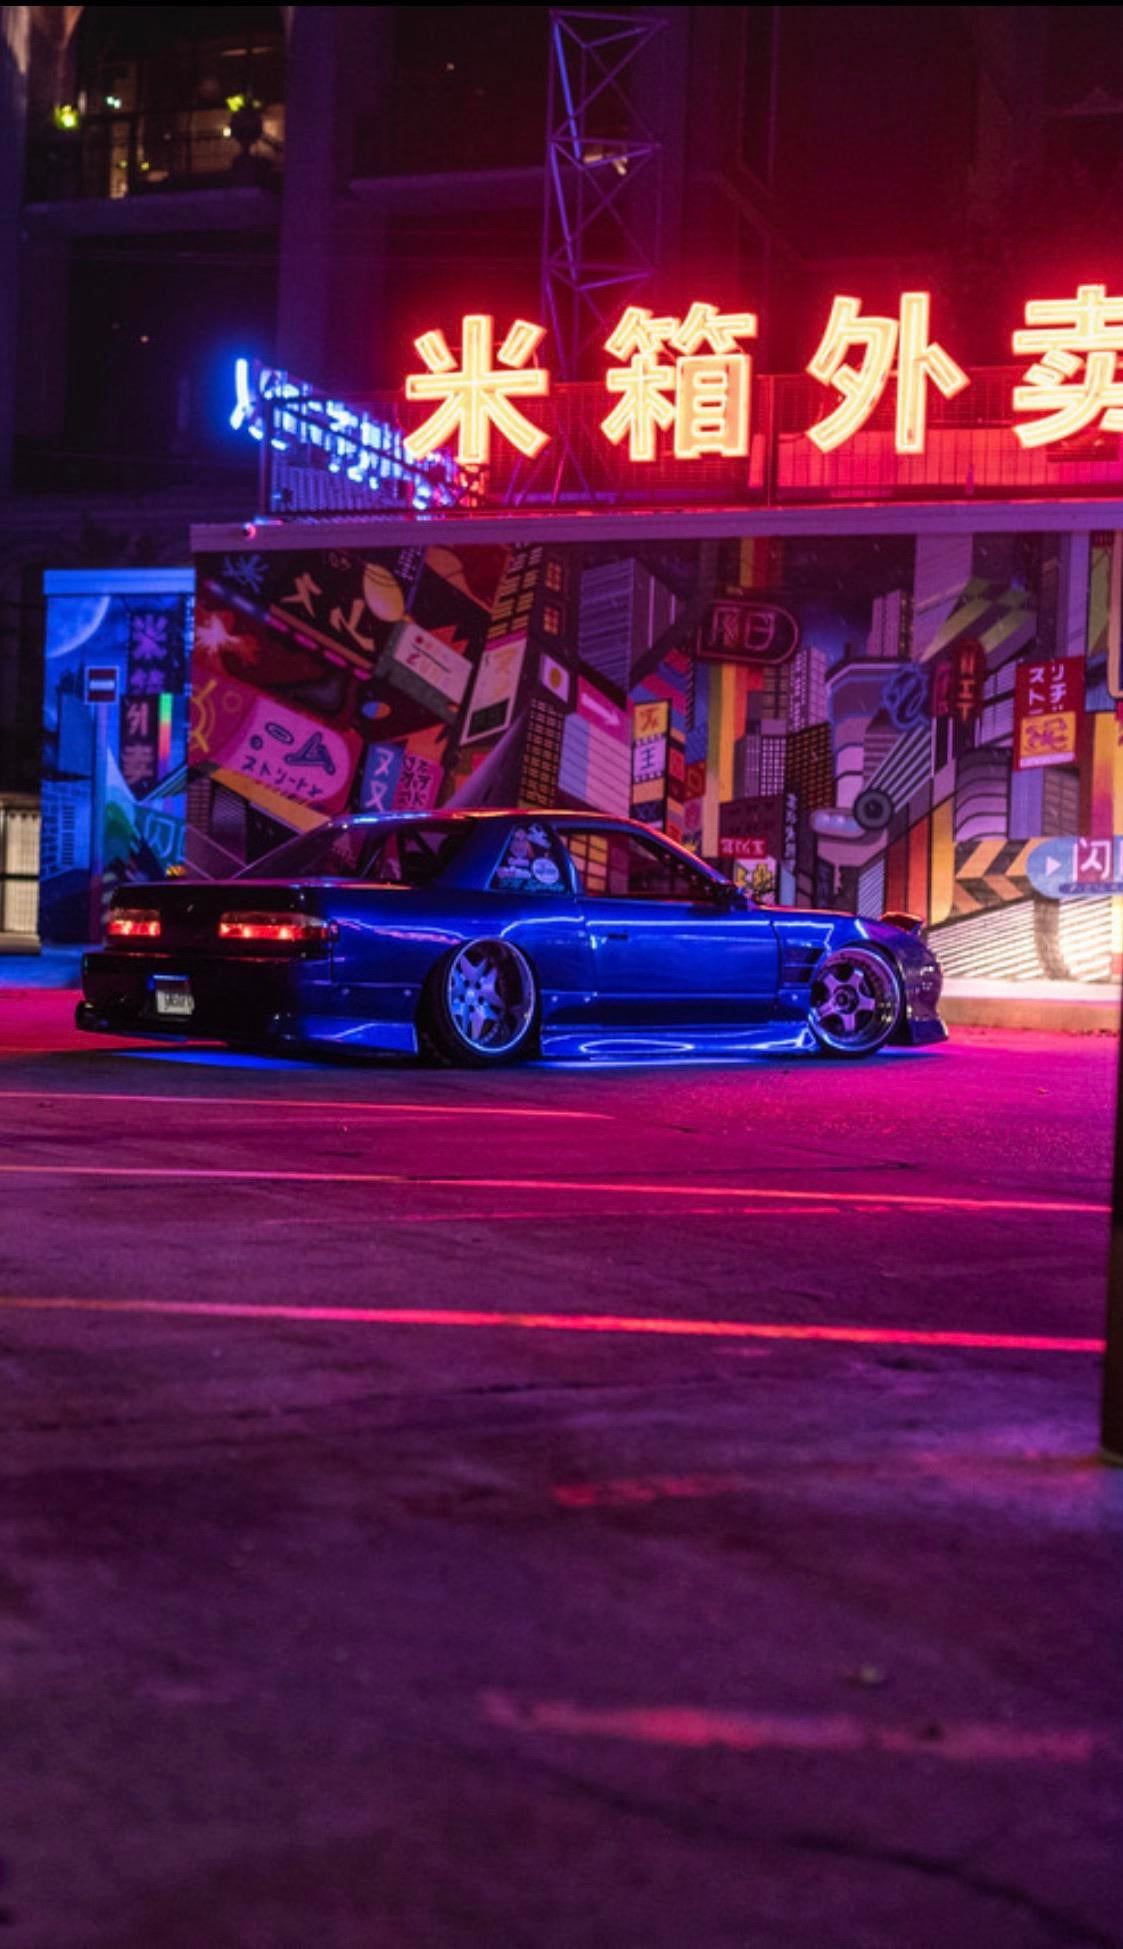 Aesthetic car parked in the street at night - JDM, cars